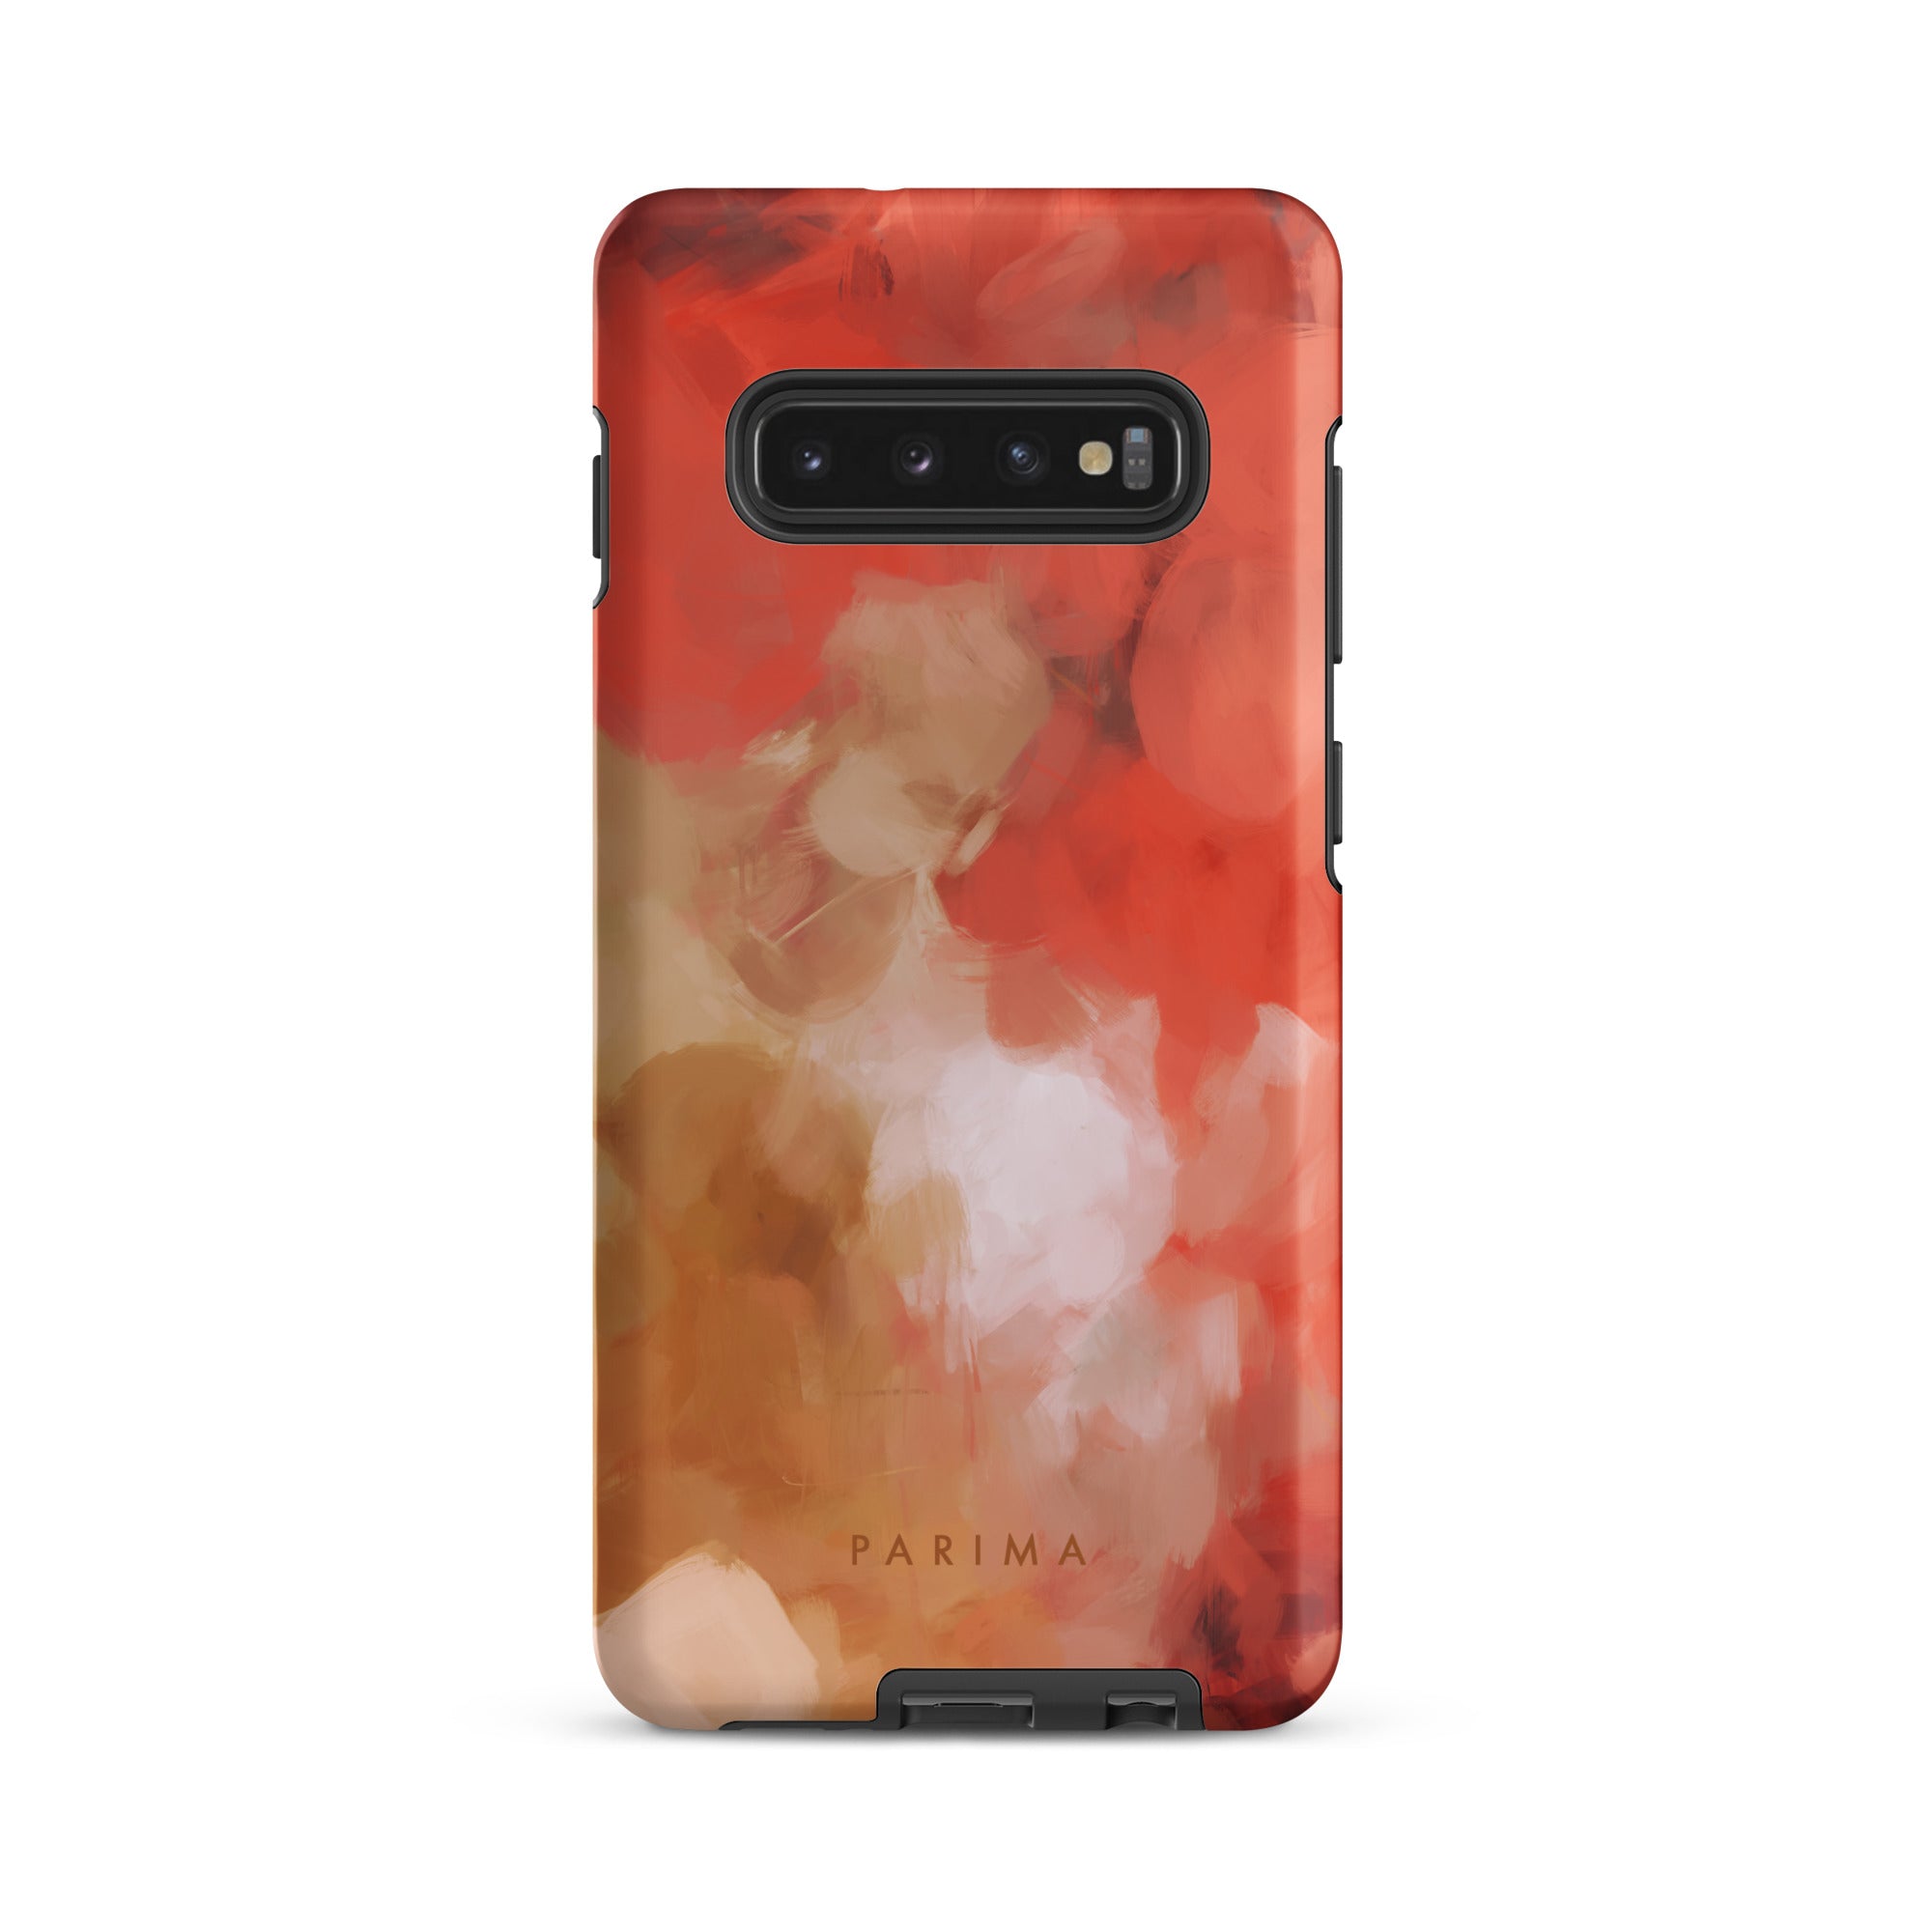 Begonia, pink and gold abstract art on Samsung Galaxy S10 plus tough case by Parima Studio